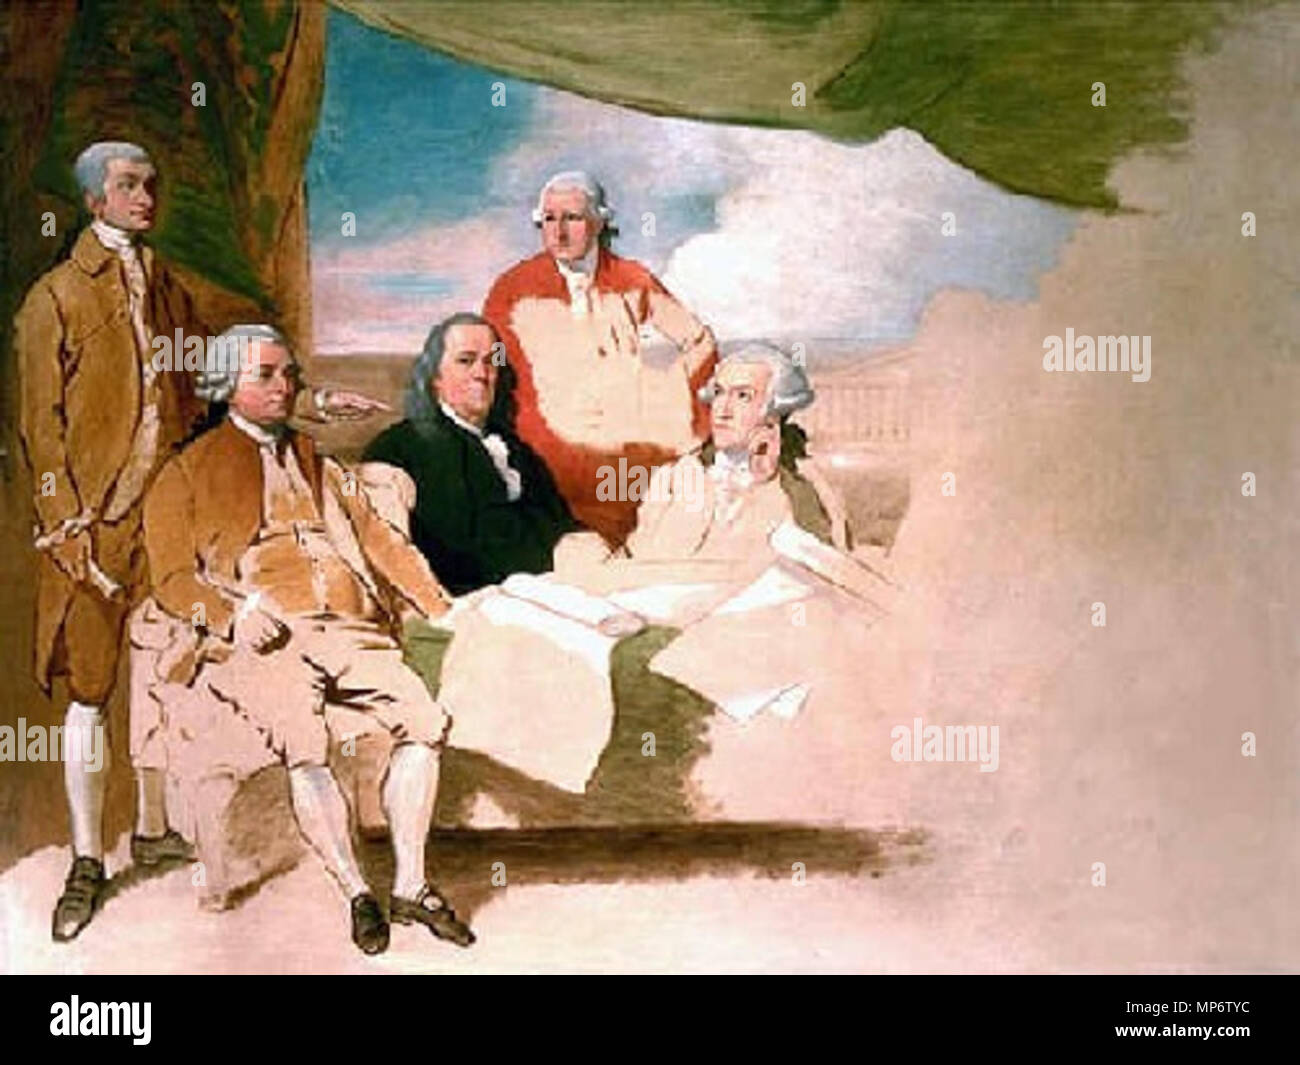 American Commissioners of the Preliminary Peace Agreement with Great Britain (unfinished oil sketch) . Benjamin West, American Commissioners of the Preliminary Peace Agreement with Great Britain, 1783-1784, London, England. (oil on canvas, unfinished sketch), Winterthur Museum, Winterthur, Delaware, gift of Henry Francis du Pont. From left to right: John Jay, John Adams, Benjamin Franklin, Henry Laurens, and William Temple Franklin. The British commissioners refused to pose, and the picture was never finished. between 1783 and 1784.   1204 Treaty of Paris by Benjamin West 1783 Stock Photo